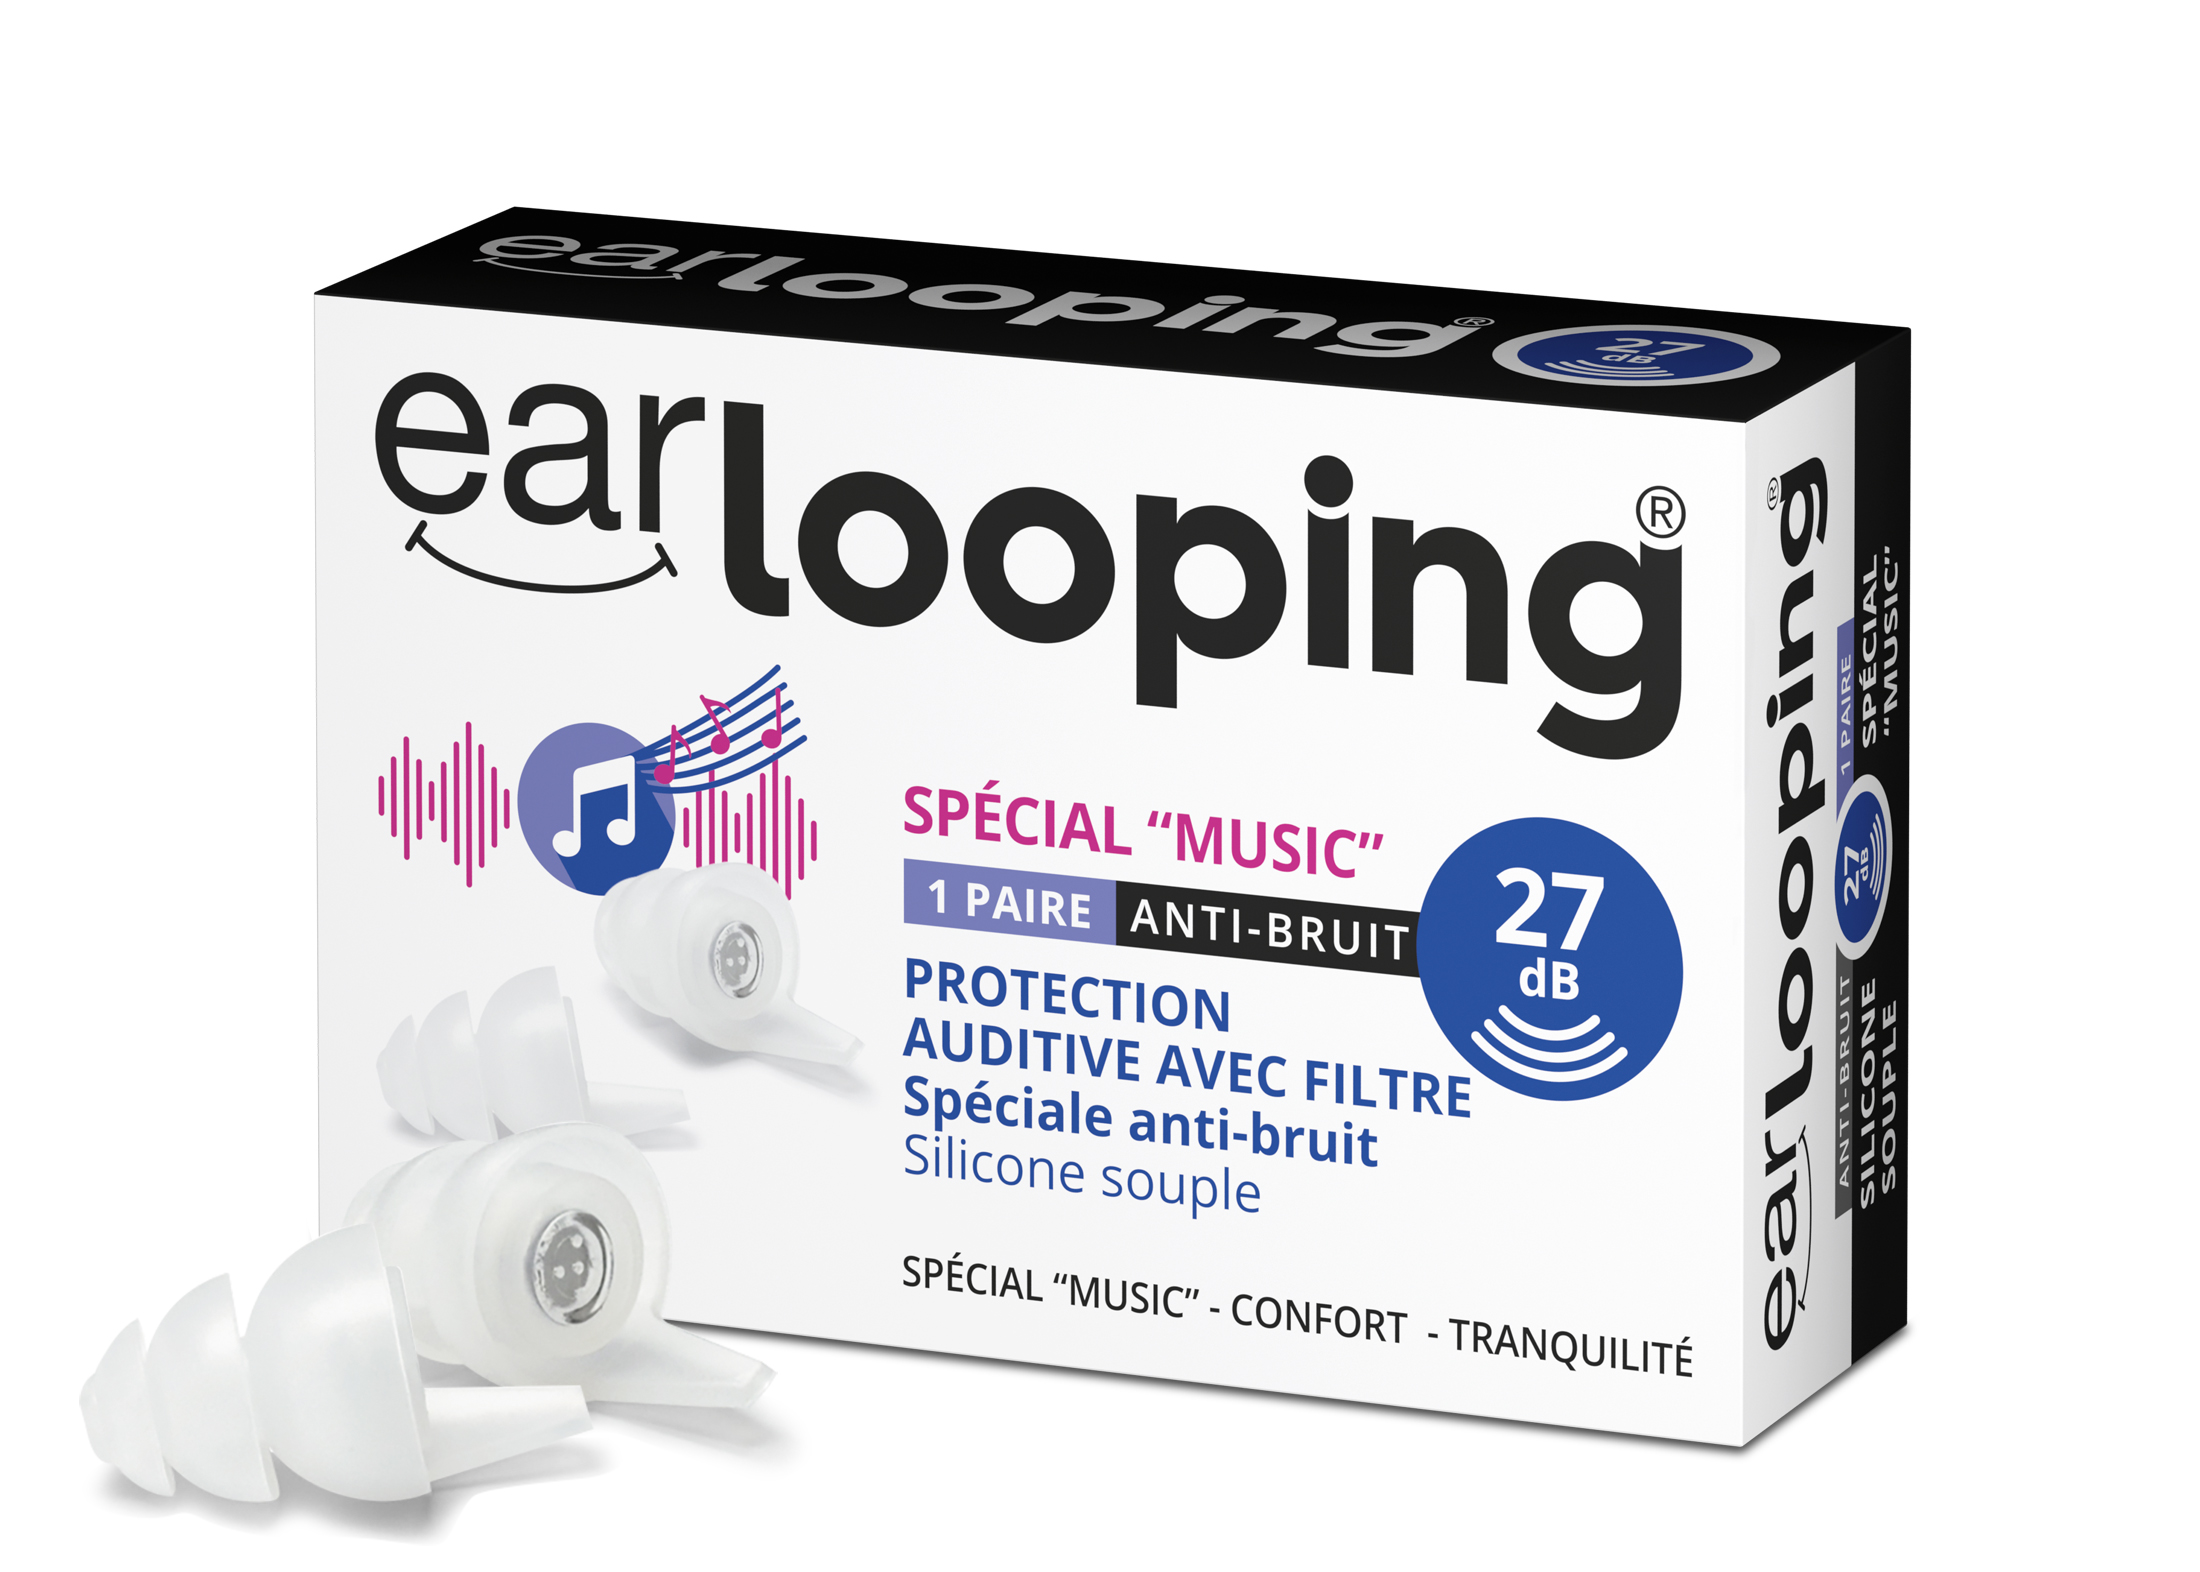 Earlooping MUSIC Protection auditive